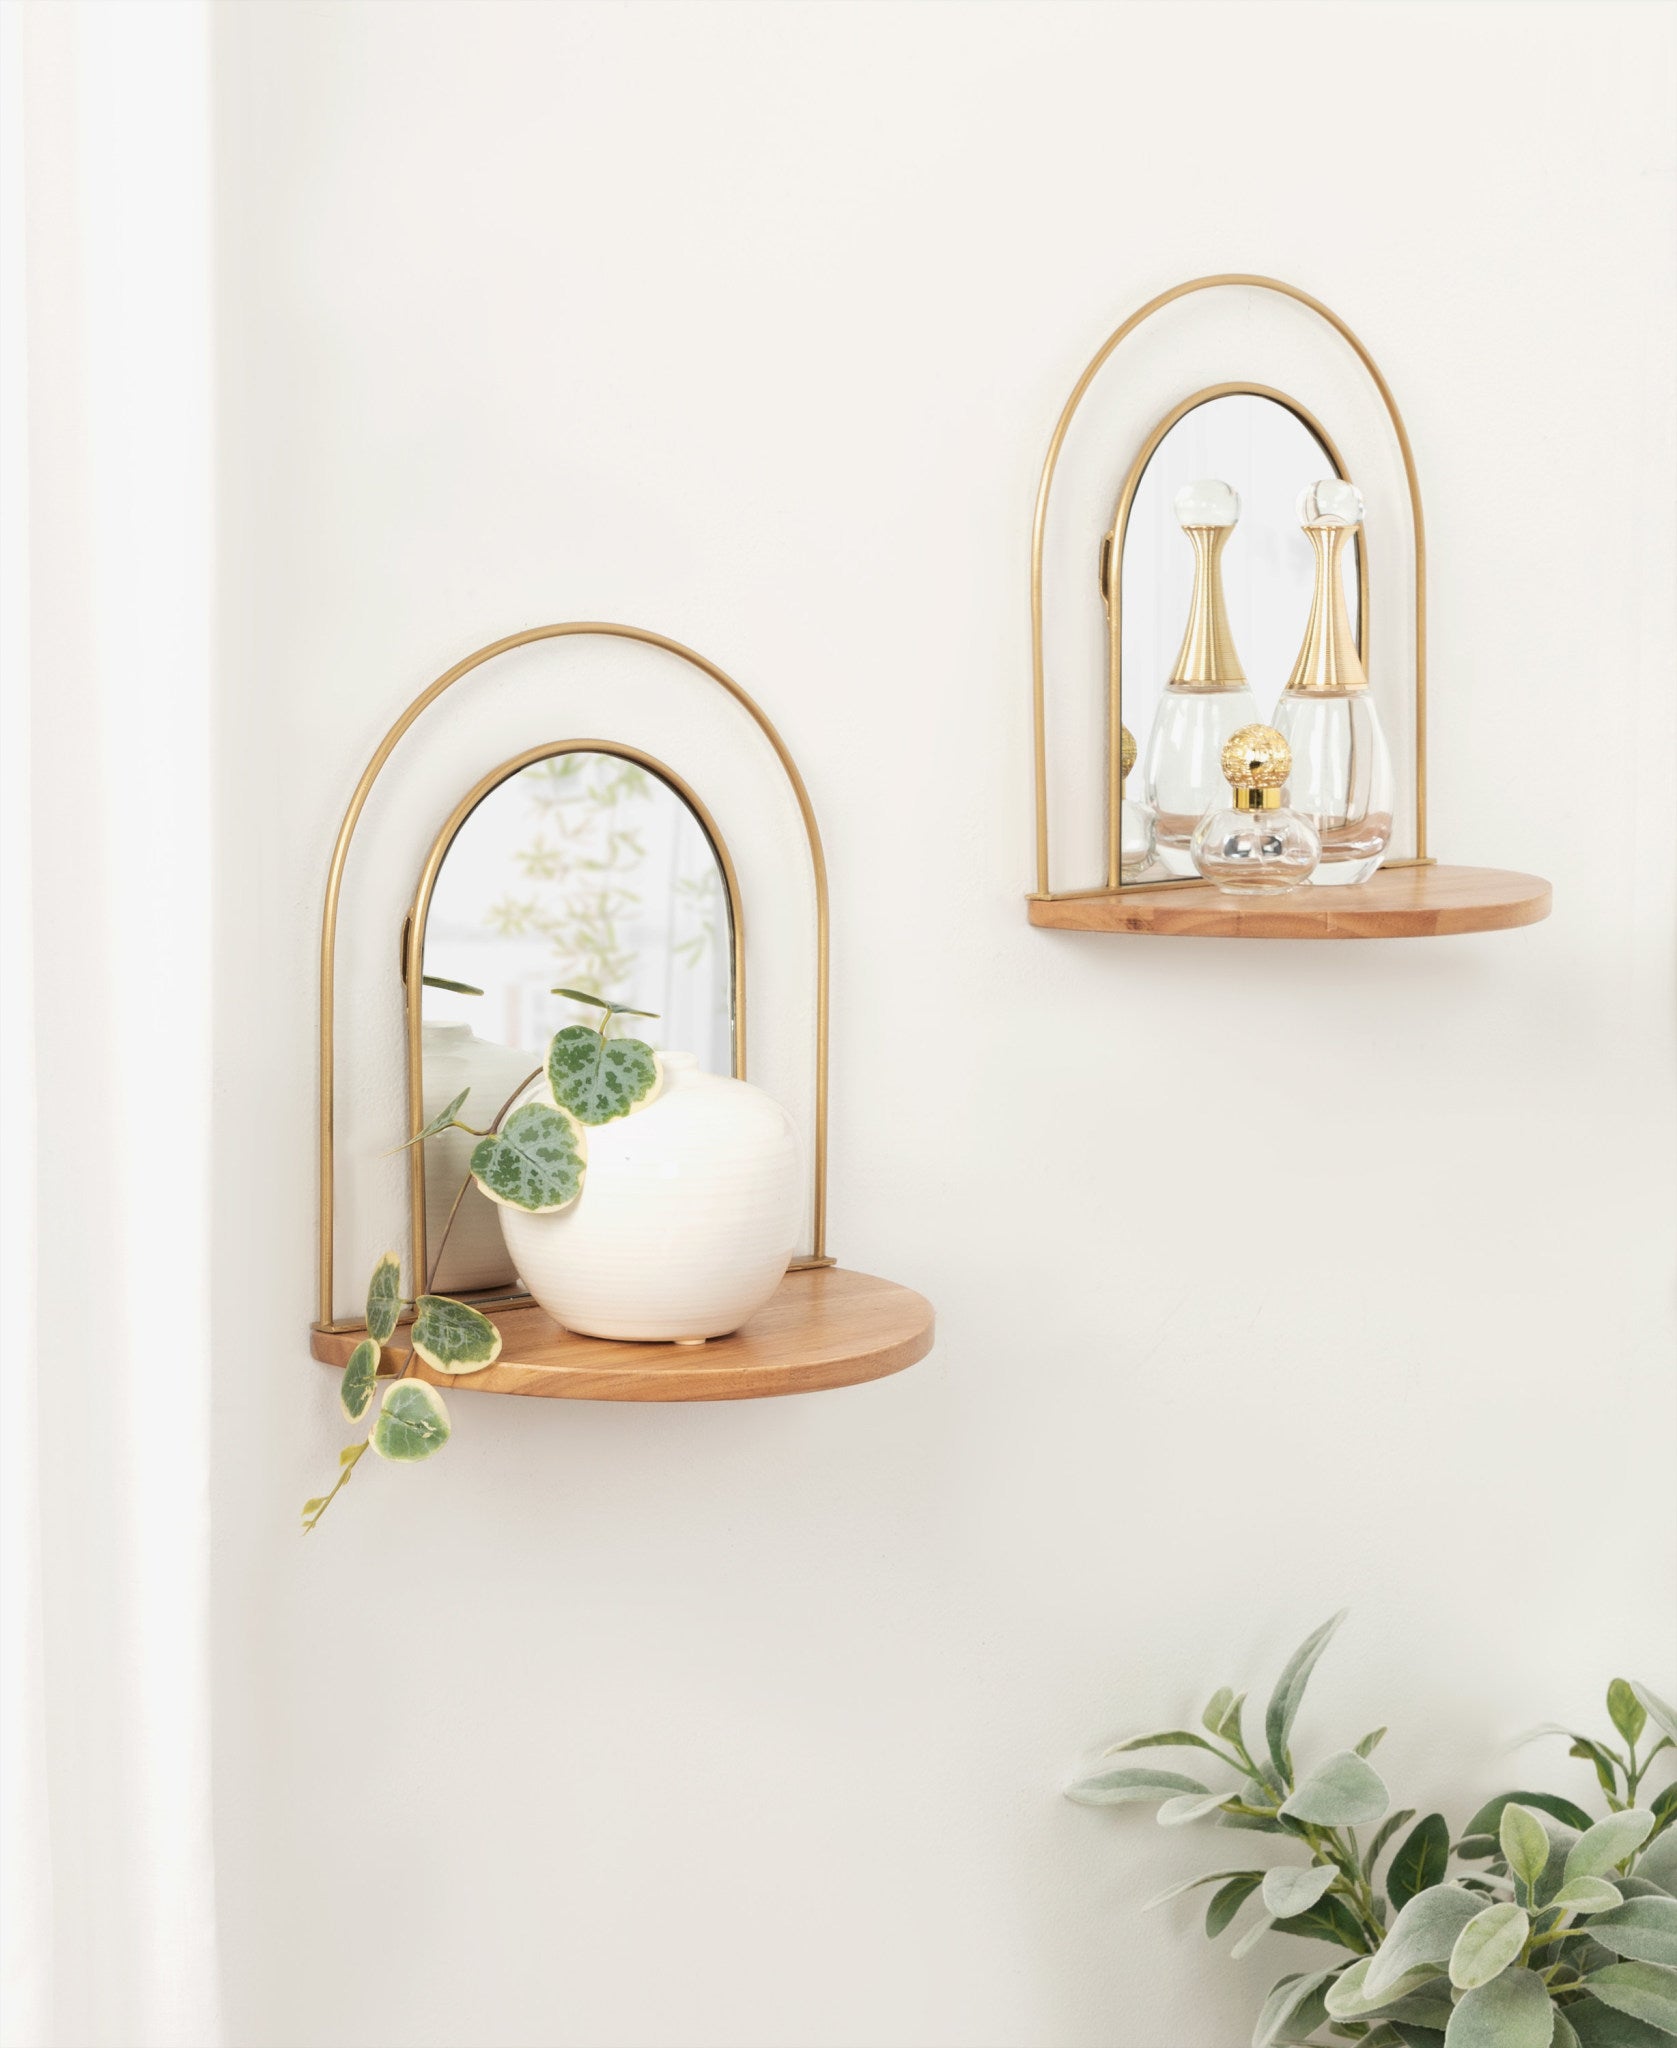 Reverie Mirror Wall Sconce Set